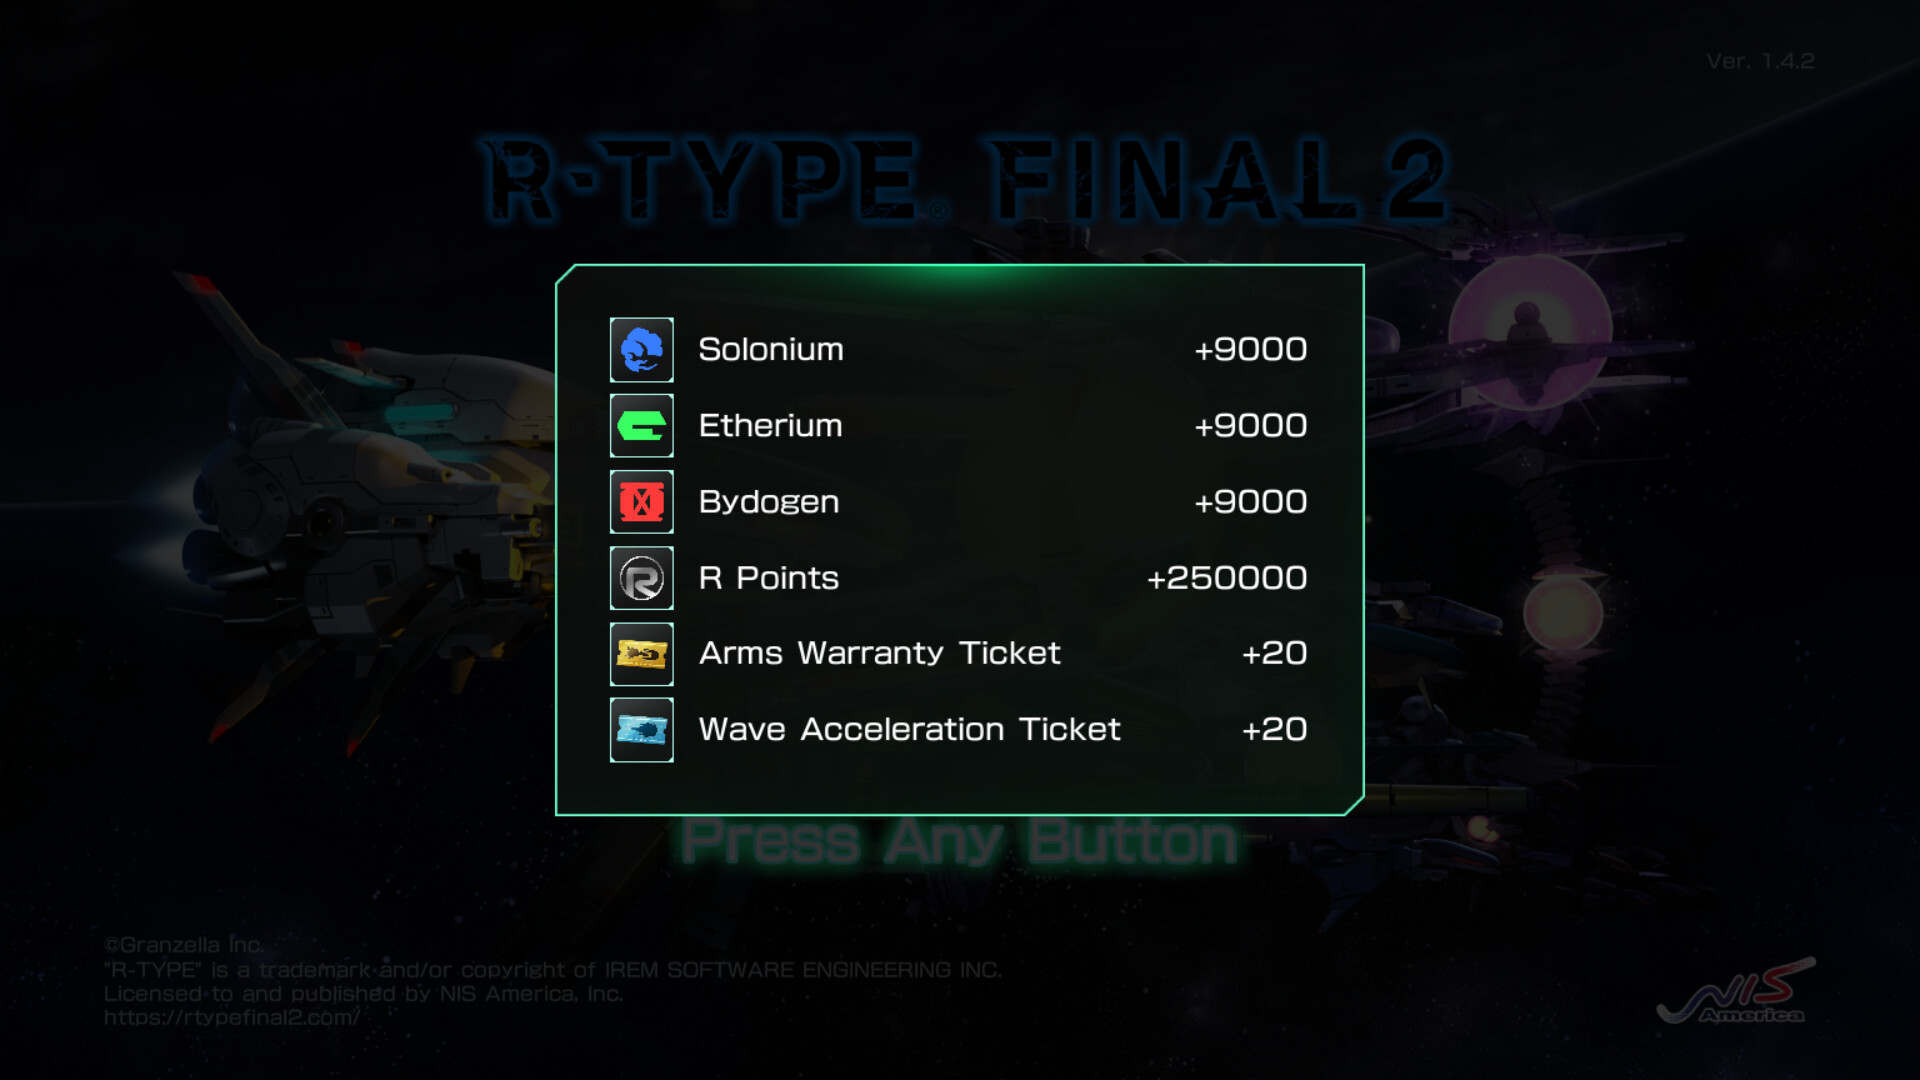 R-Type Final 2 - Ace Pilot Special Training Pack III DLC Steam CD Key 5.64 USD